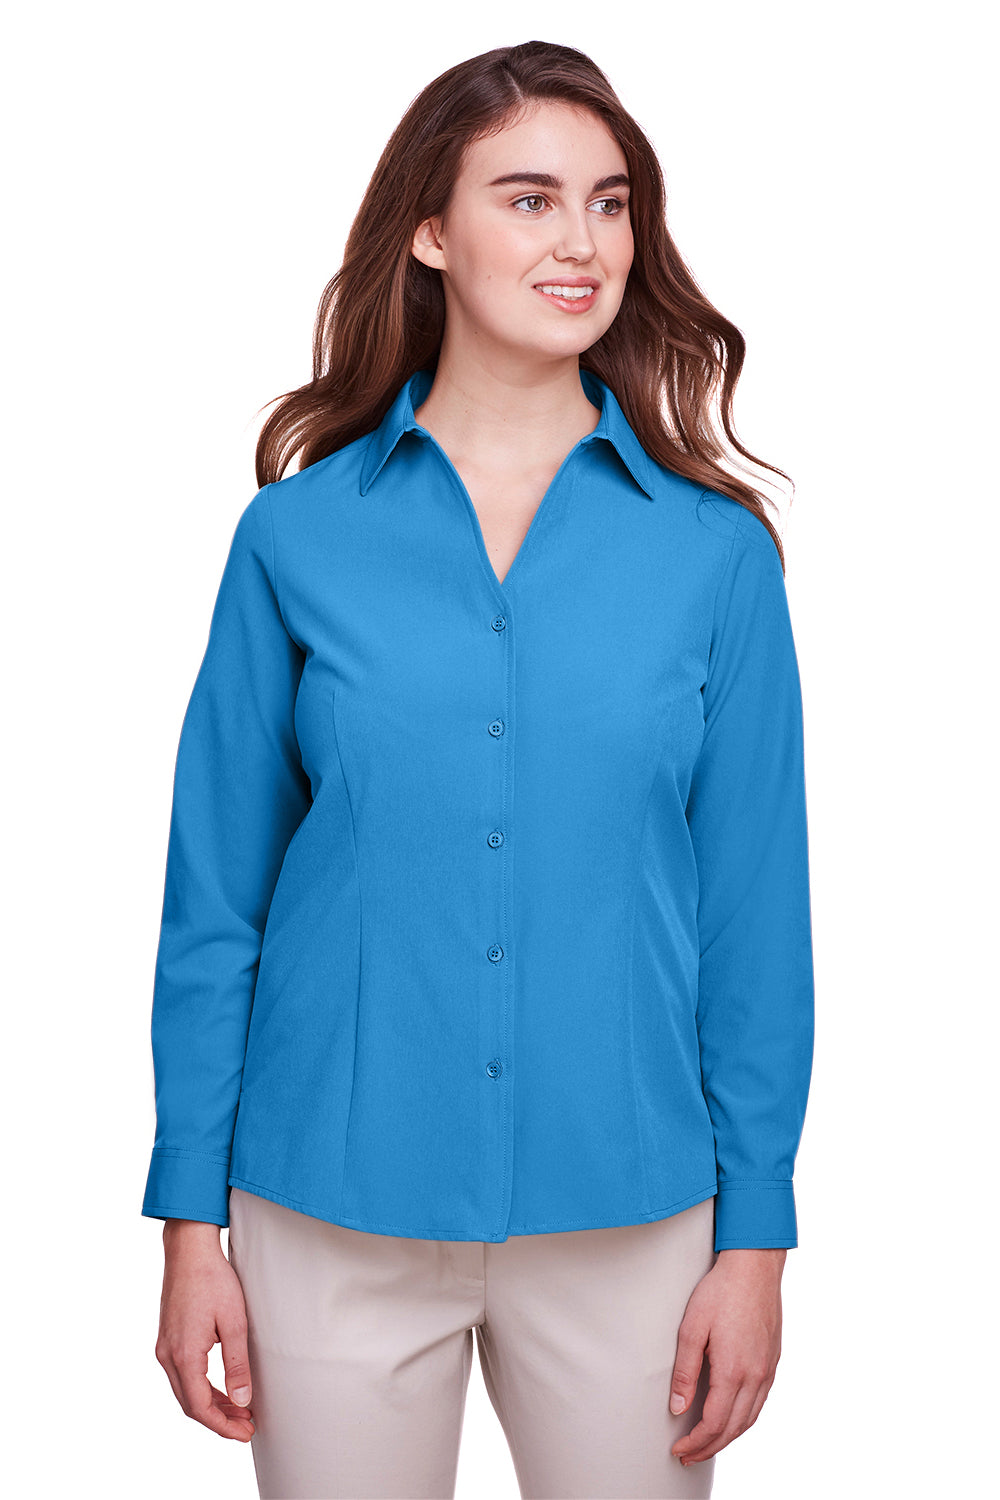 UltraClub UC500W Womens Bradley Performance Moisture Wicking Long Sleeve Button Down Shirt Pacific Blue Front